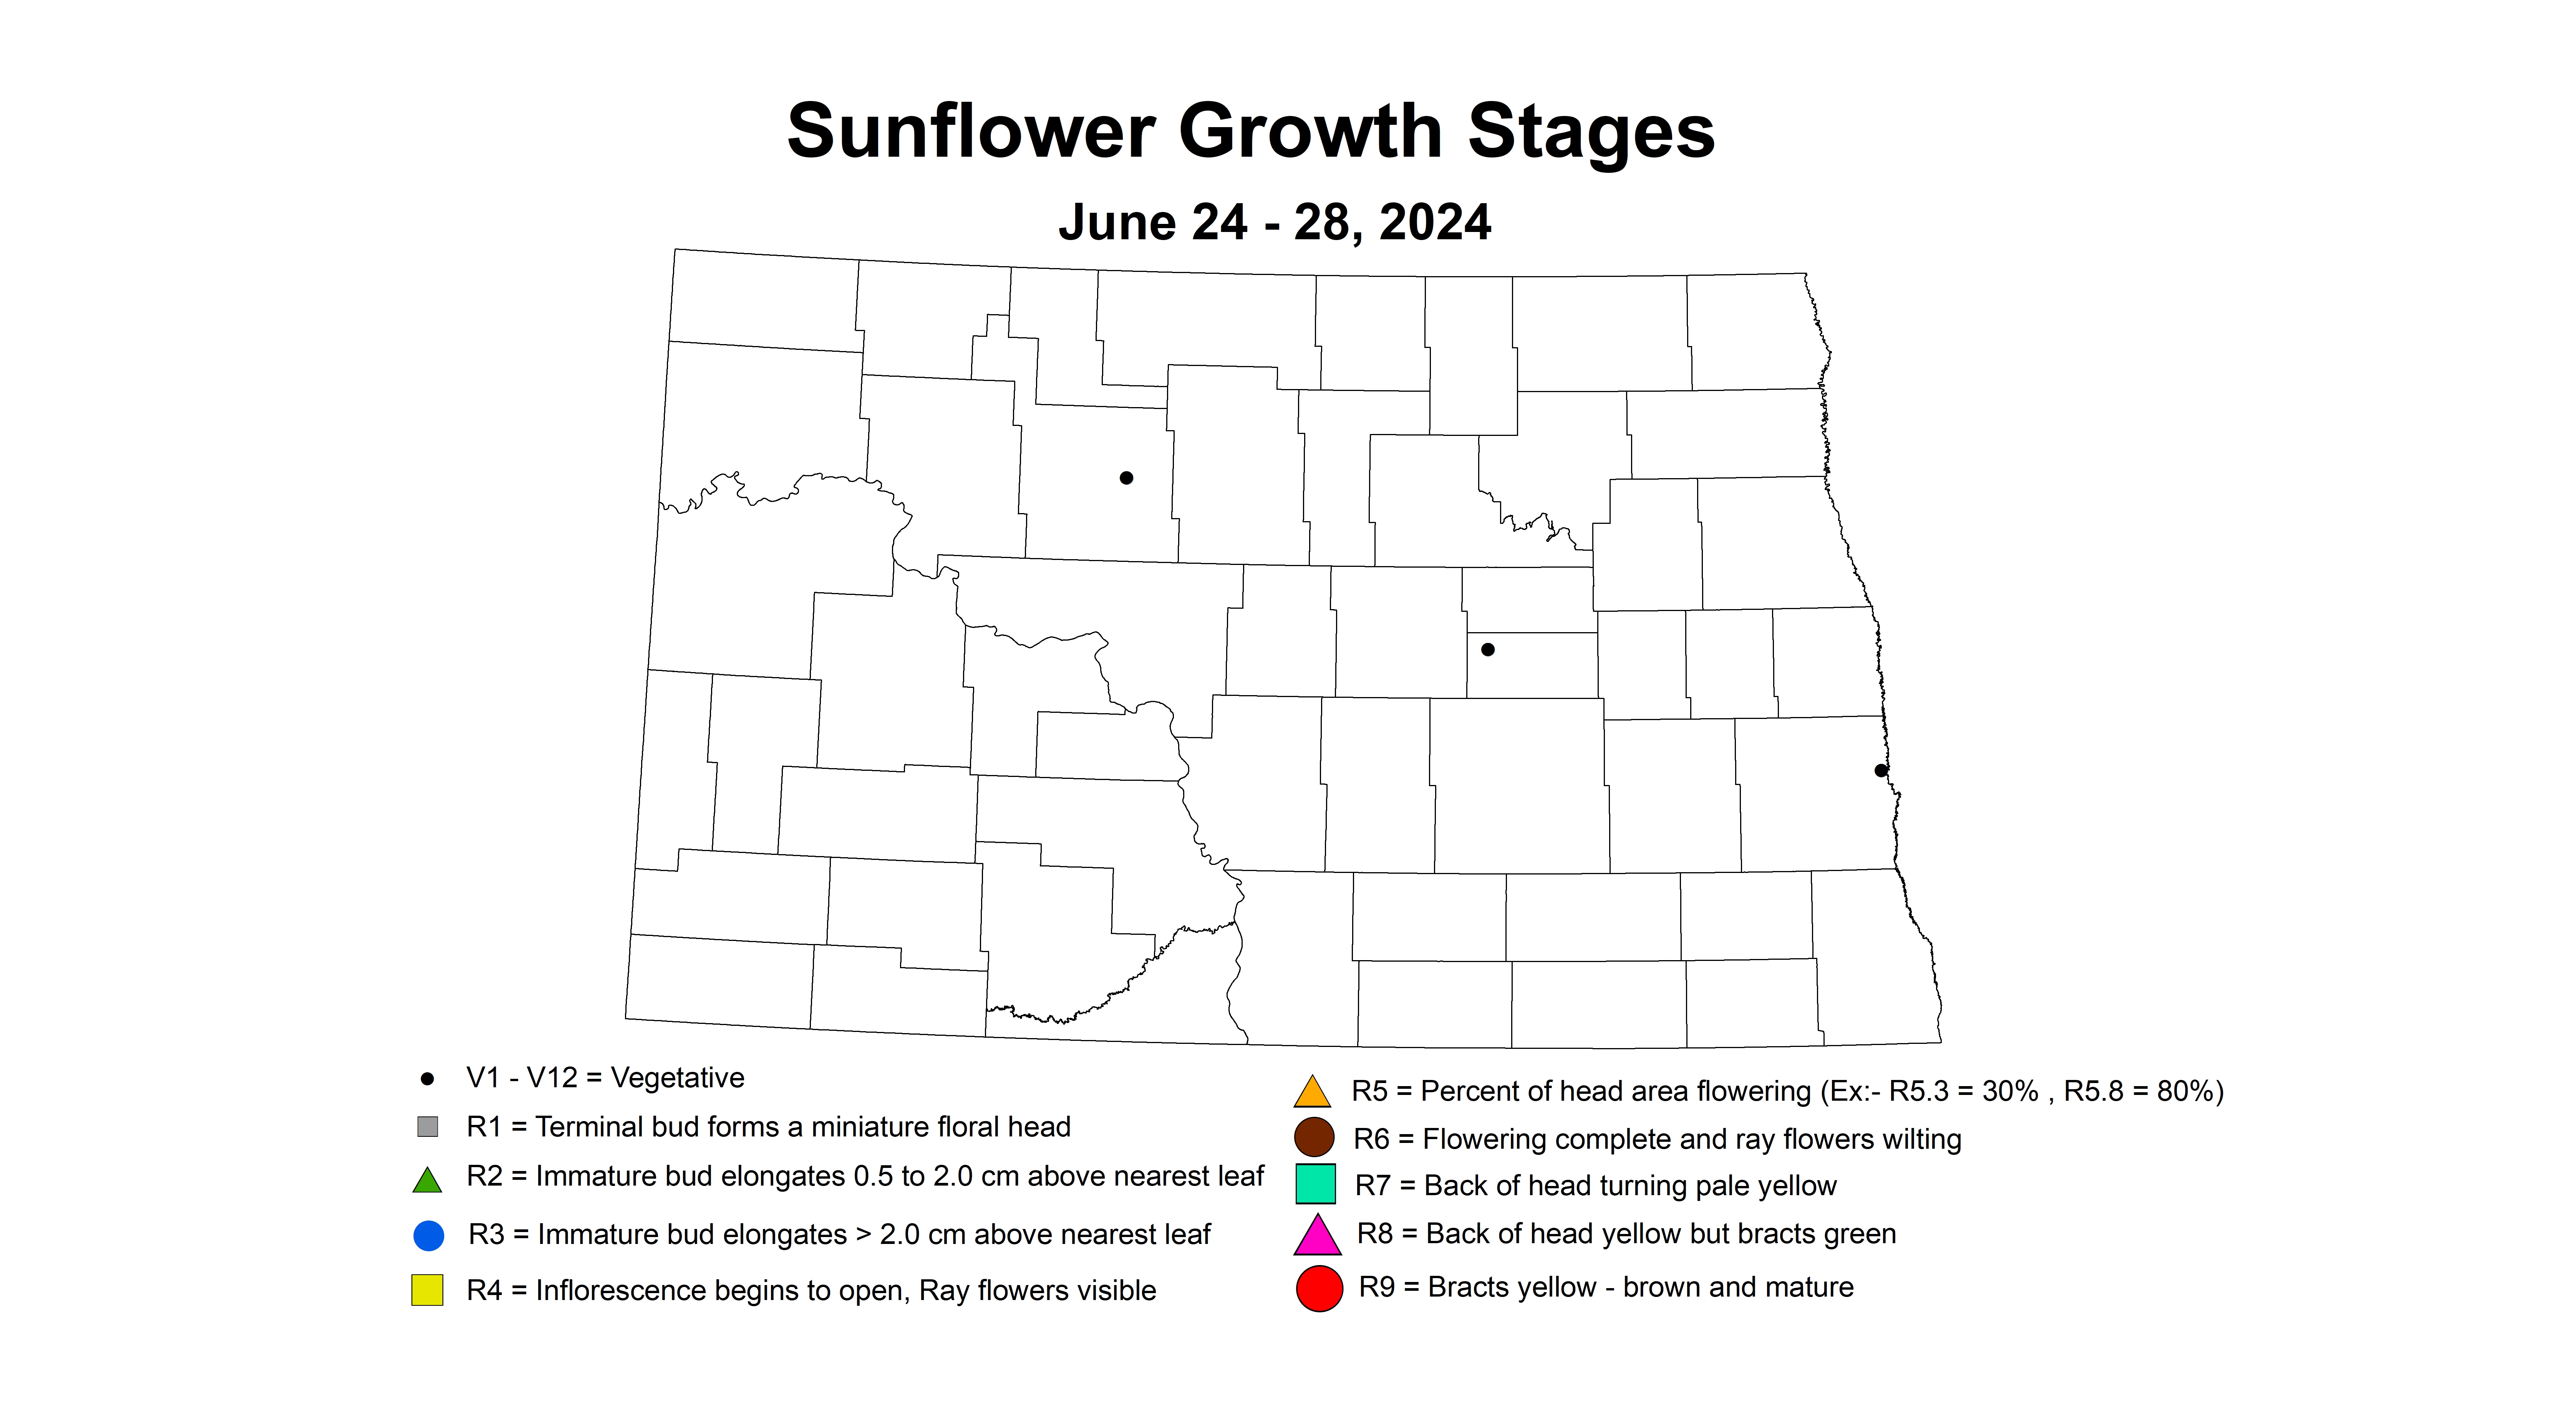 sunflower growth stages June 24-28 2023